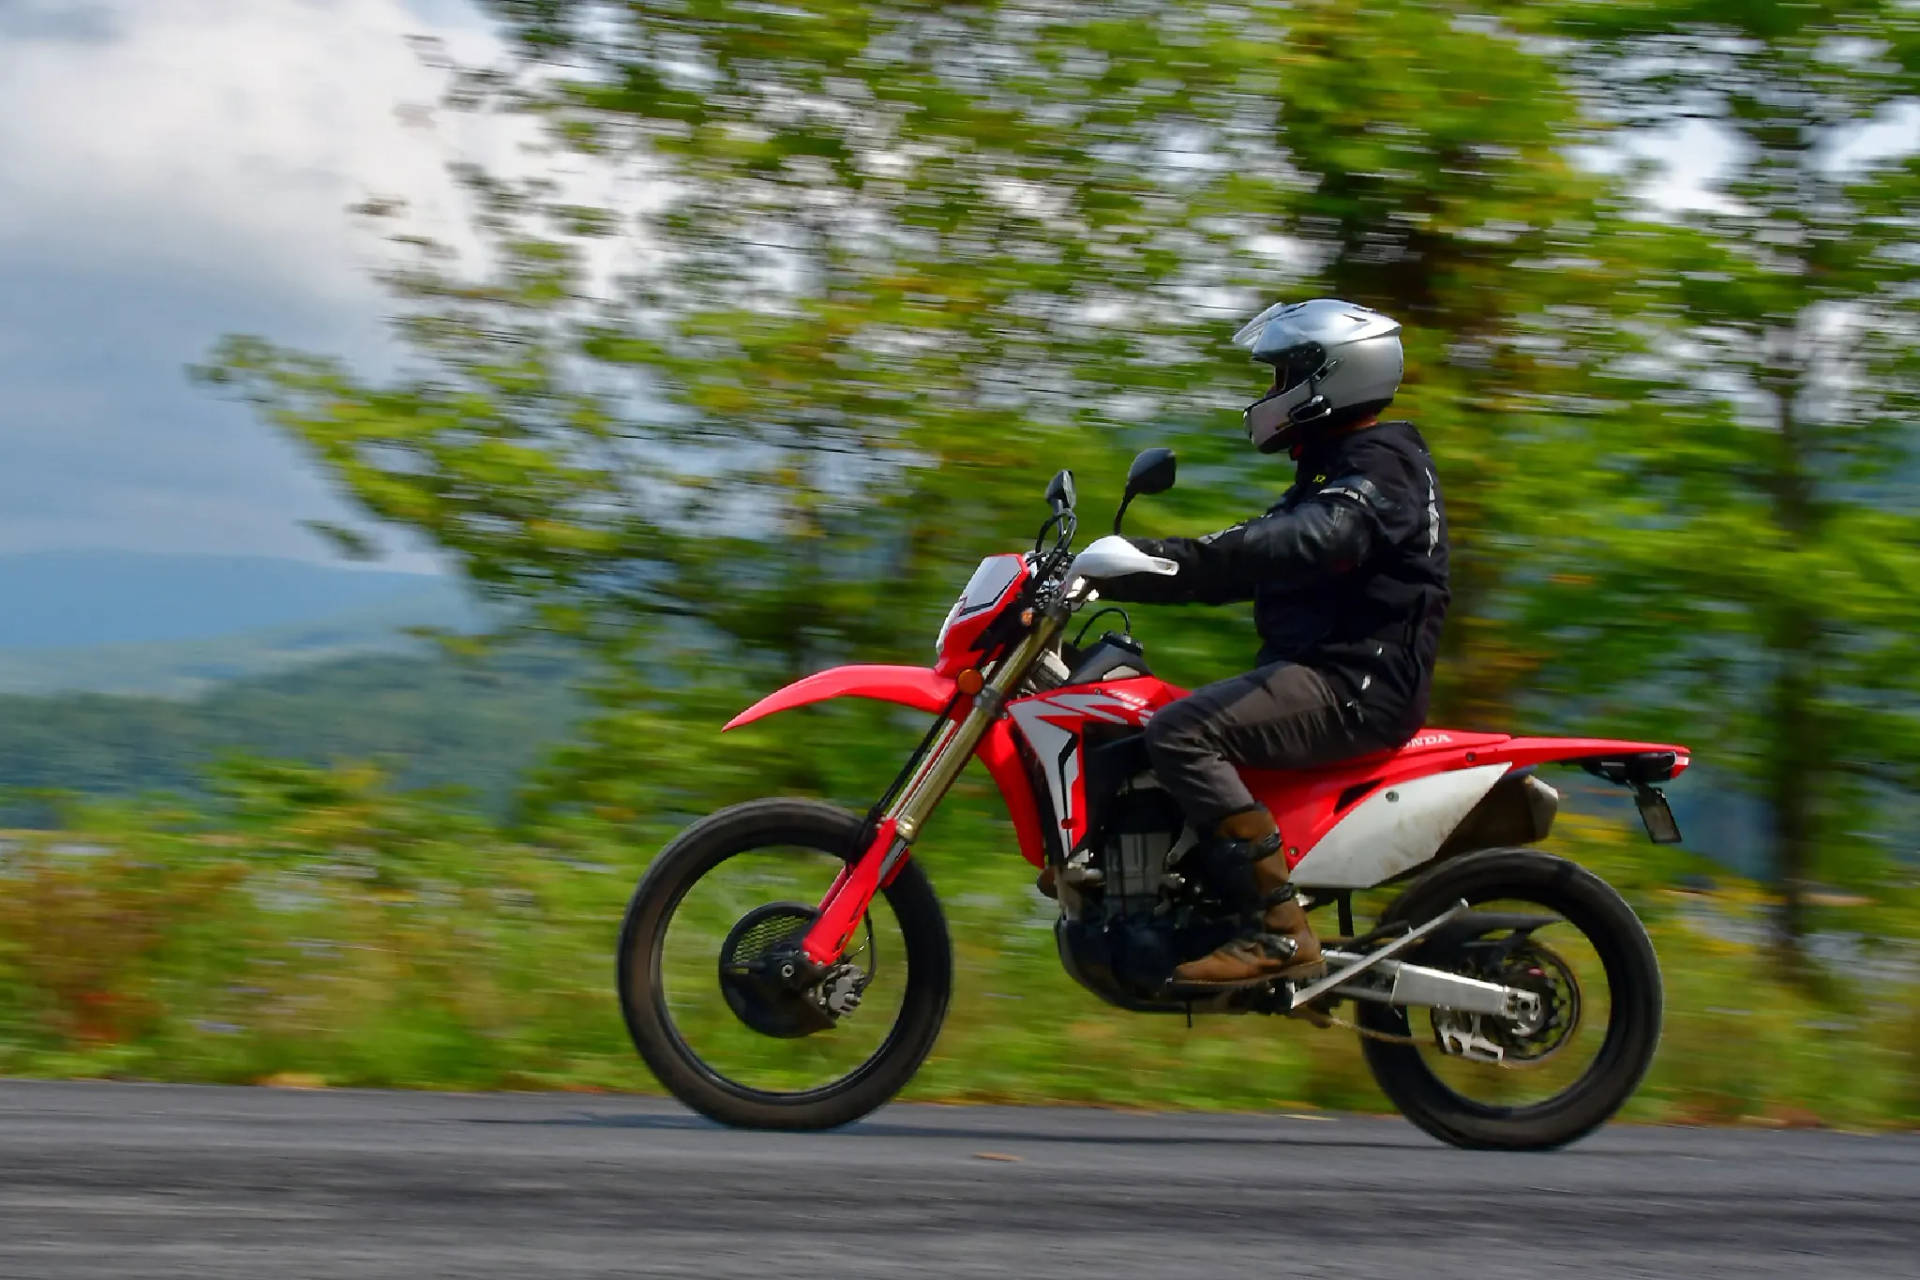 Dirtbike On Road Background